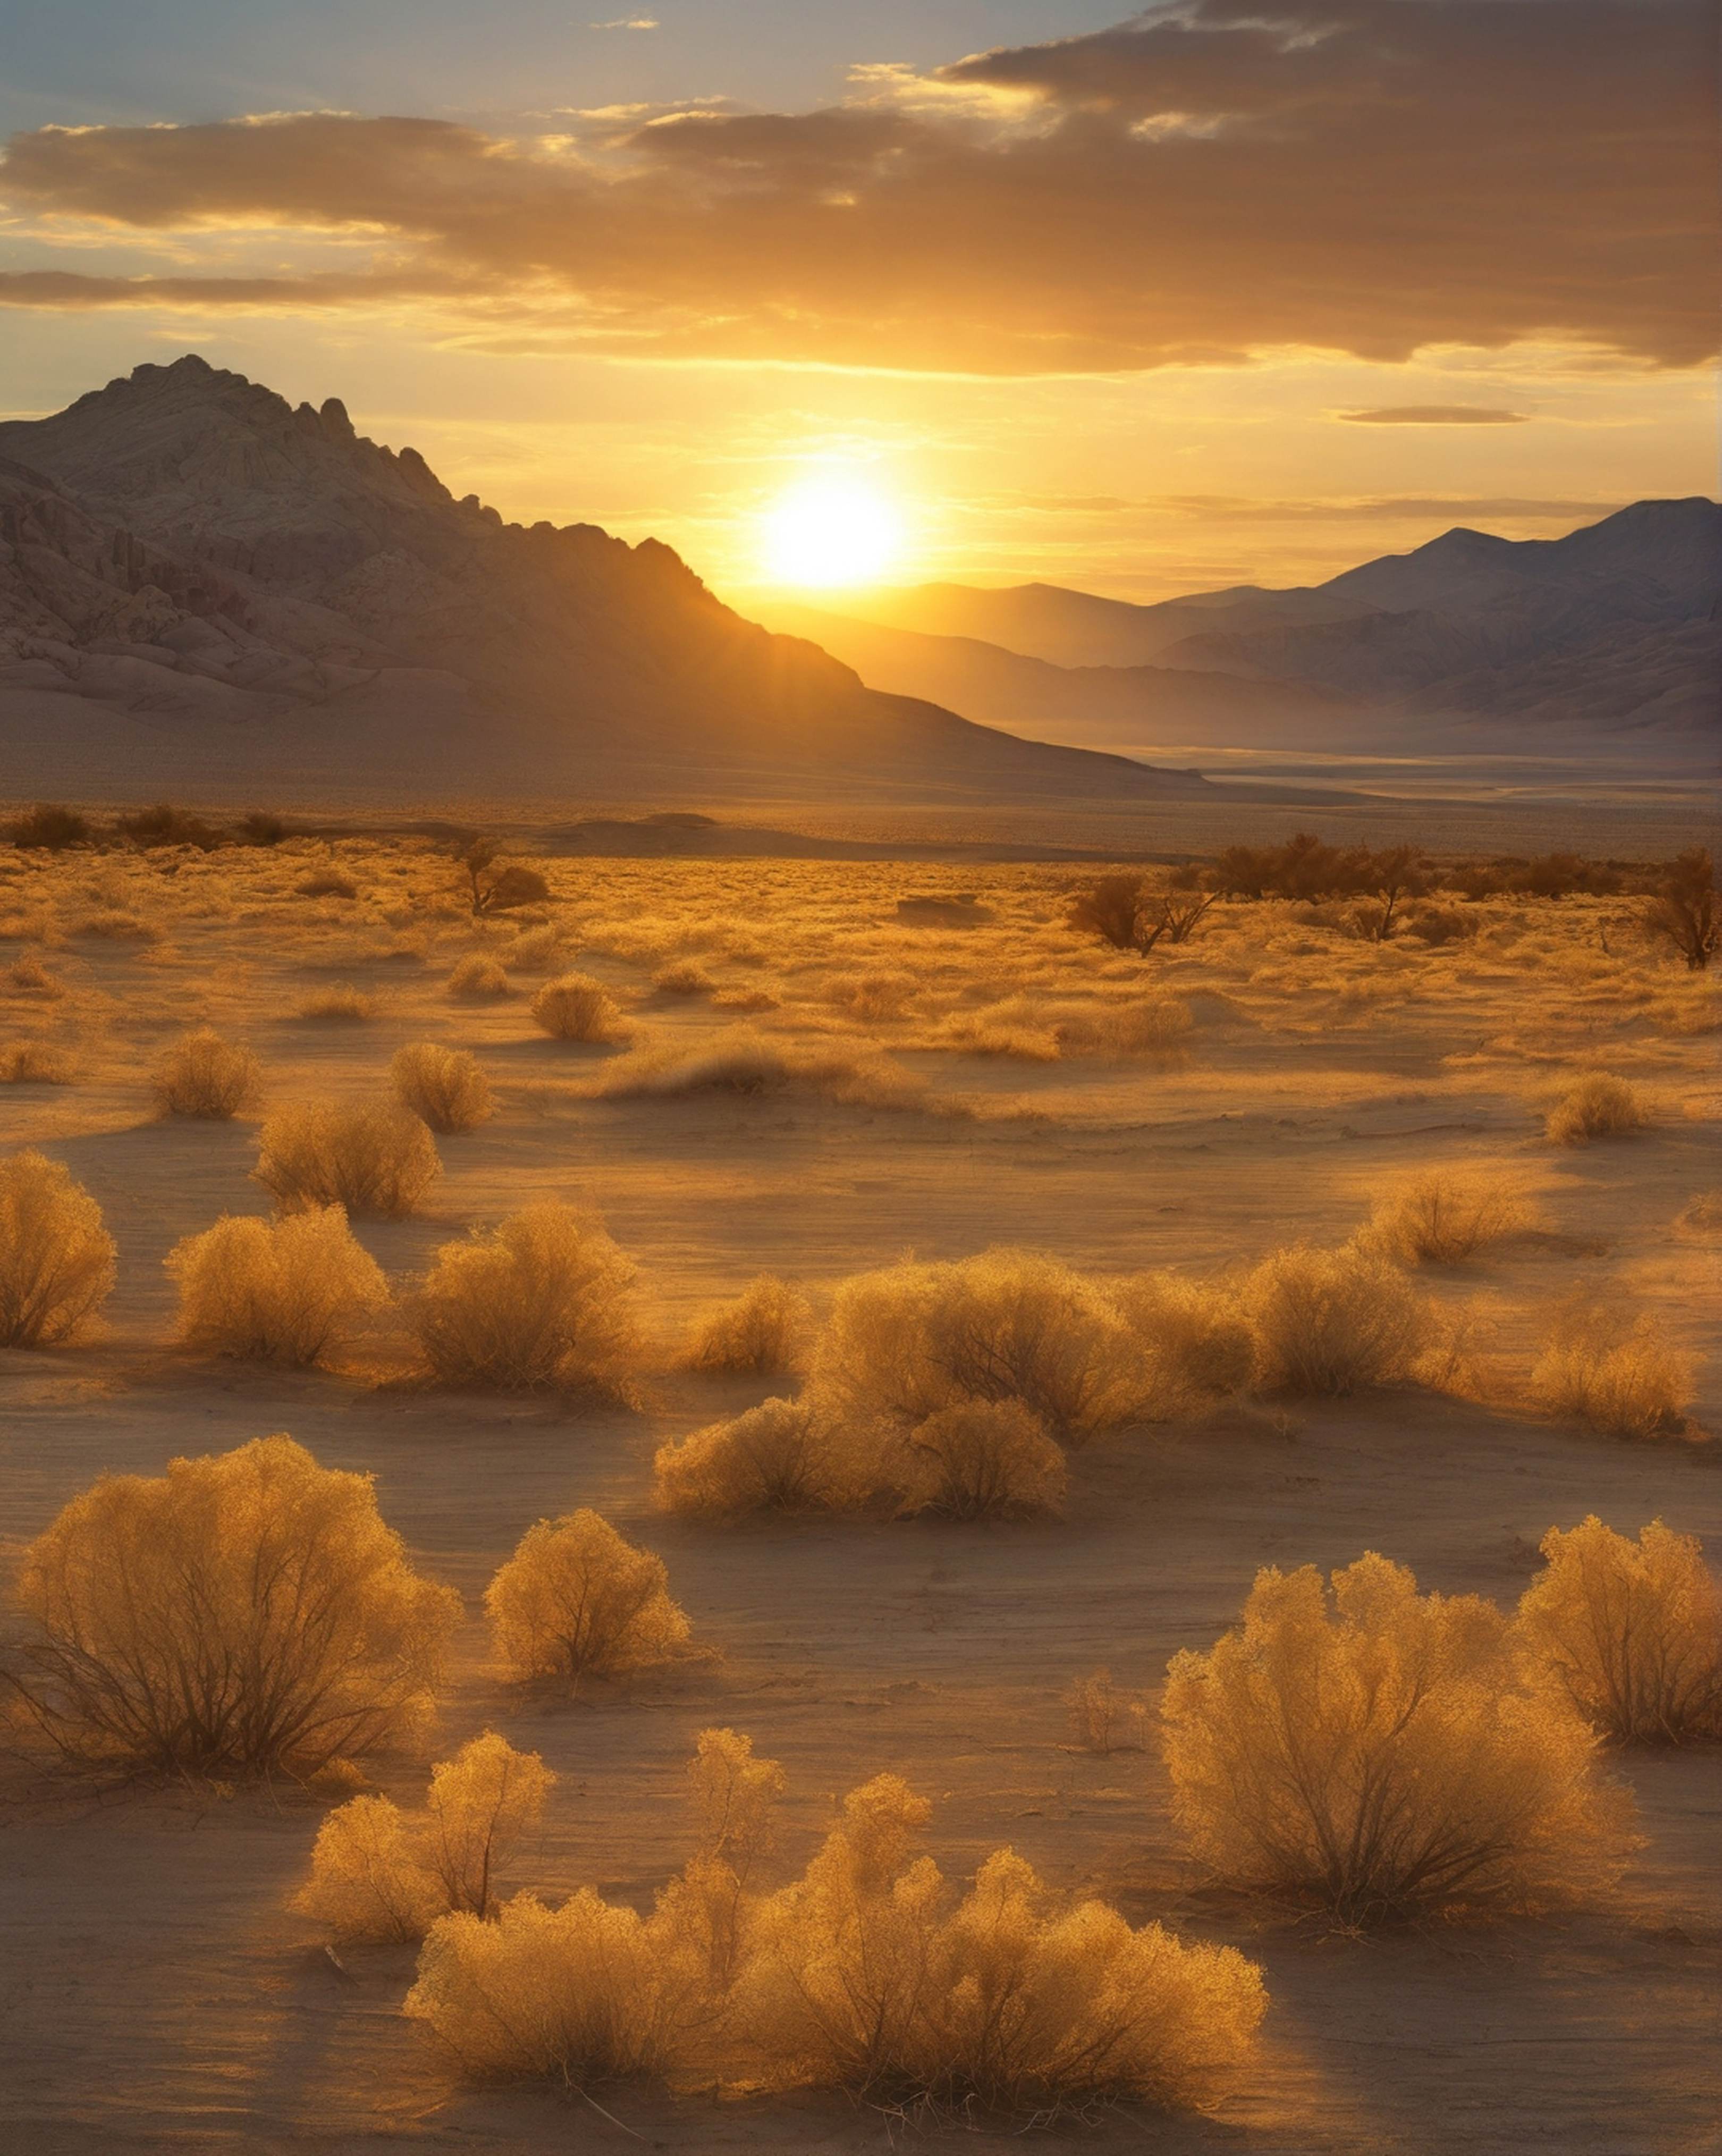 Nature's Detail: The Magnificent Sunrise in the USA